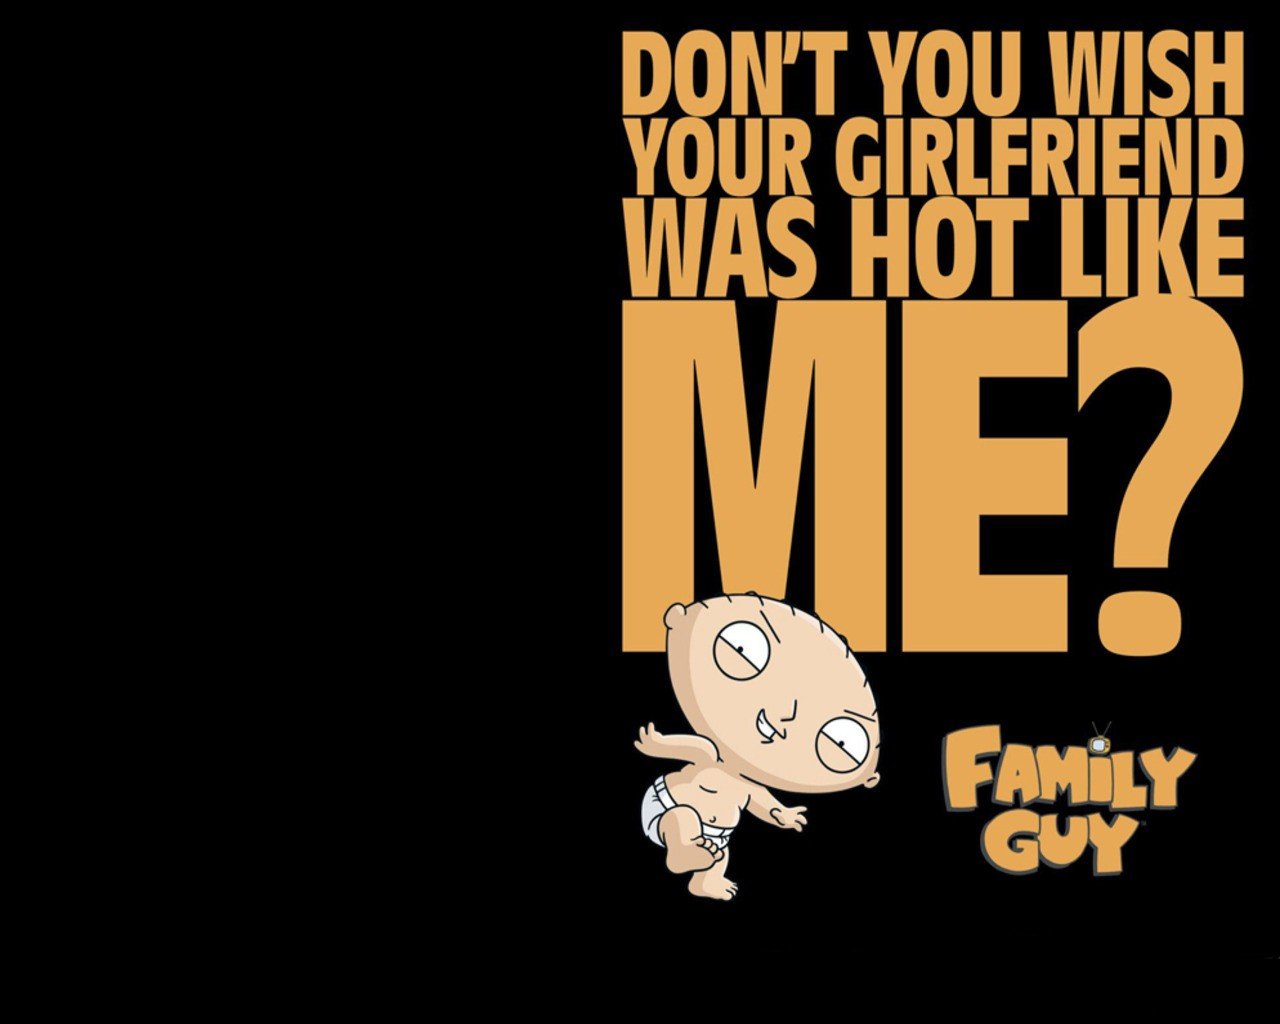 Family Guy Wallpapers 1280x1024 Desktop Backgrounds Images, Photos, Reviews